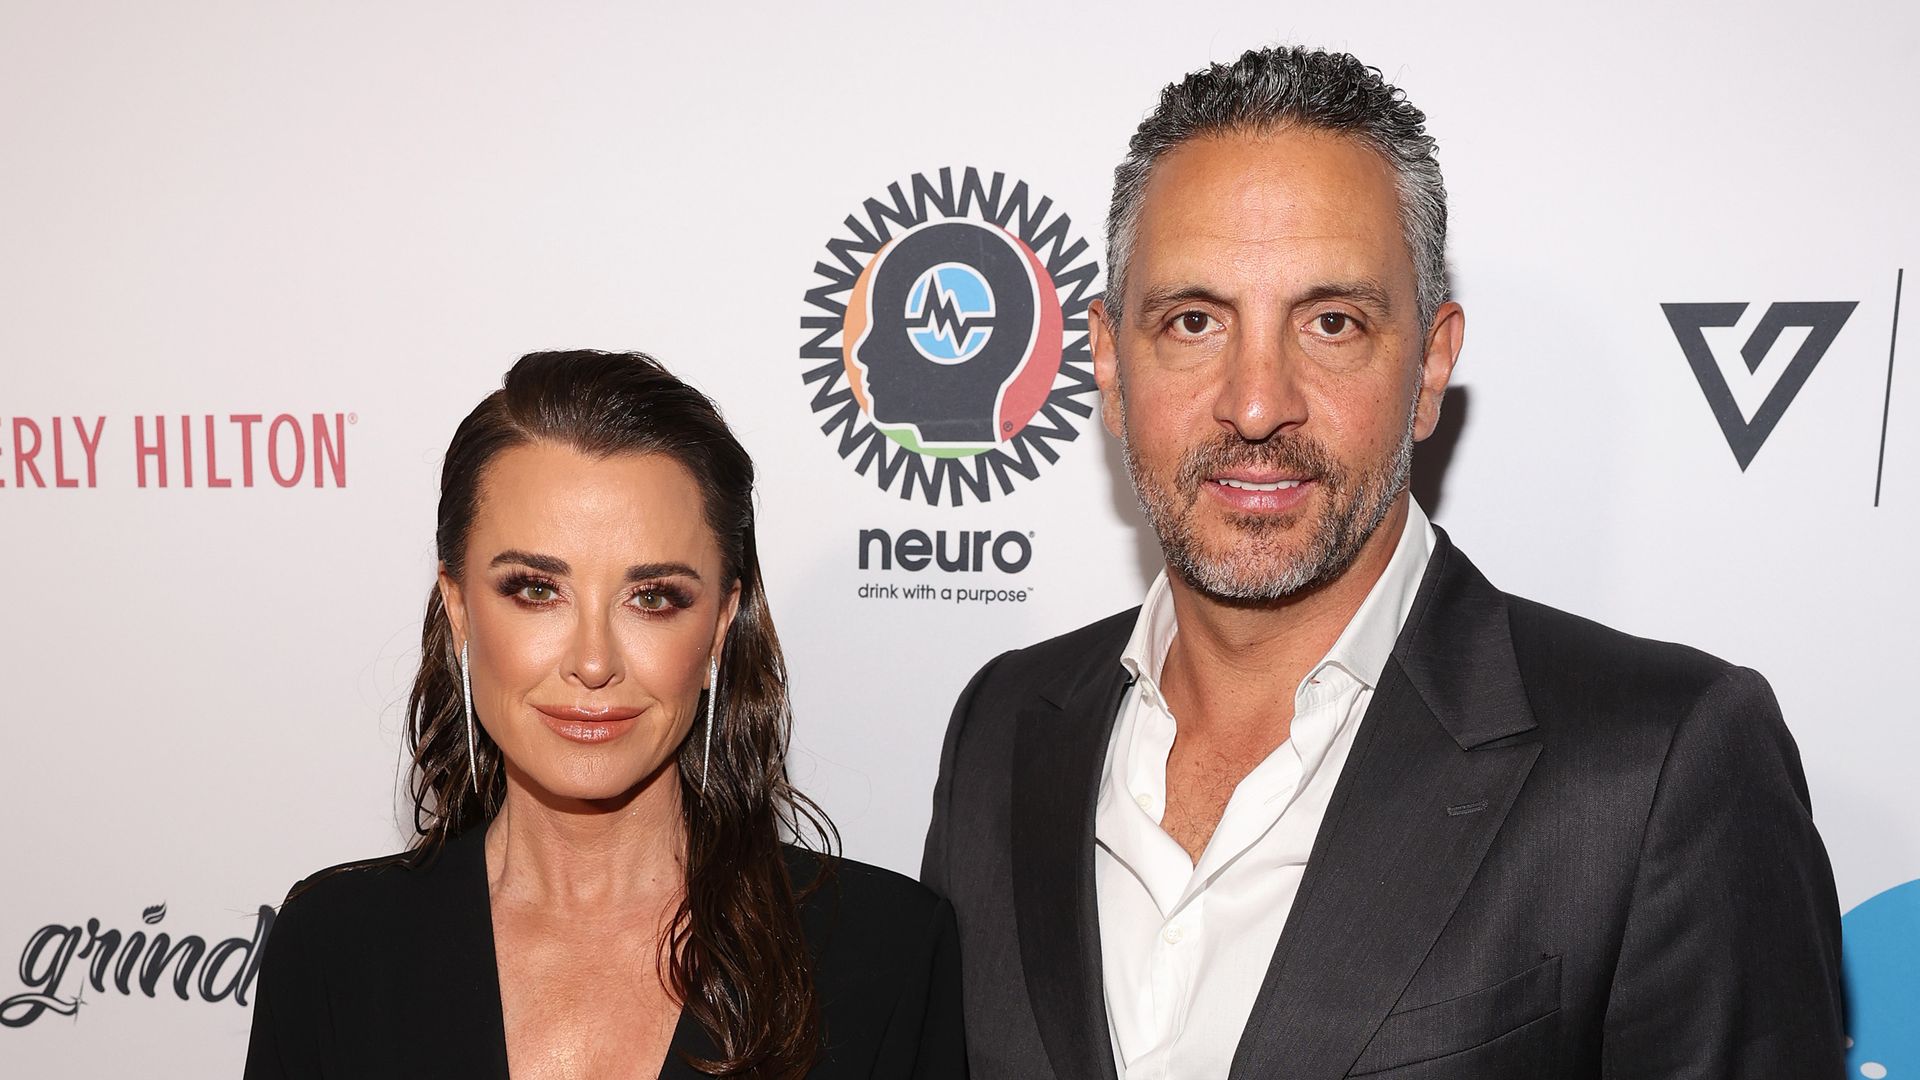 Kyle Richards and Mauricio Umansky attend the Homeless Not Toothless Hollywood Gala at The Beverly Hilton on April 22, 2023 in Beverly Hills, California